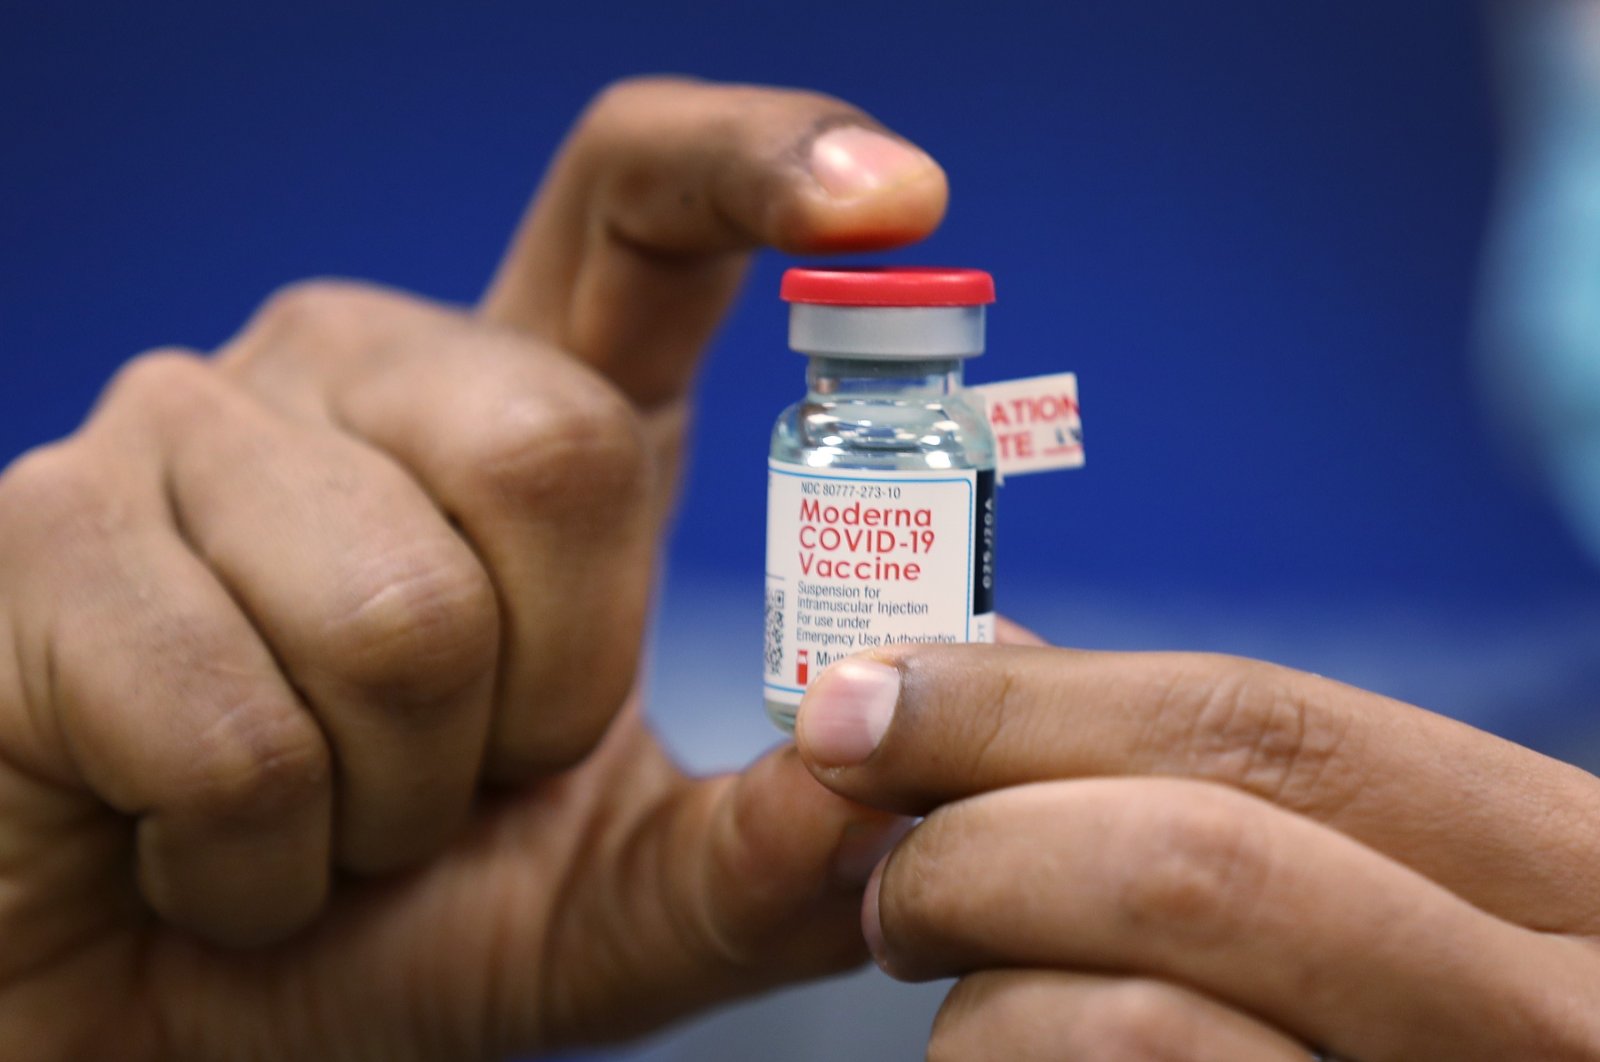 Dave Lacknauth, Director of Pharmacy Services at Broward Health Medical Center holds a bottle of the Moderna COVID-19 vaccine during a press conference on Dec. 23, 2020 in Fort Lauderdale, Florida. (AFP Photo)